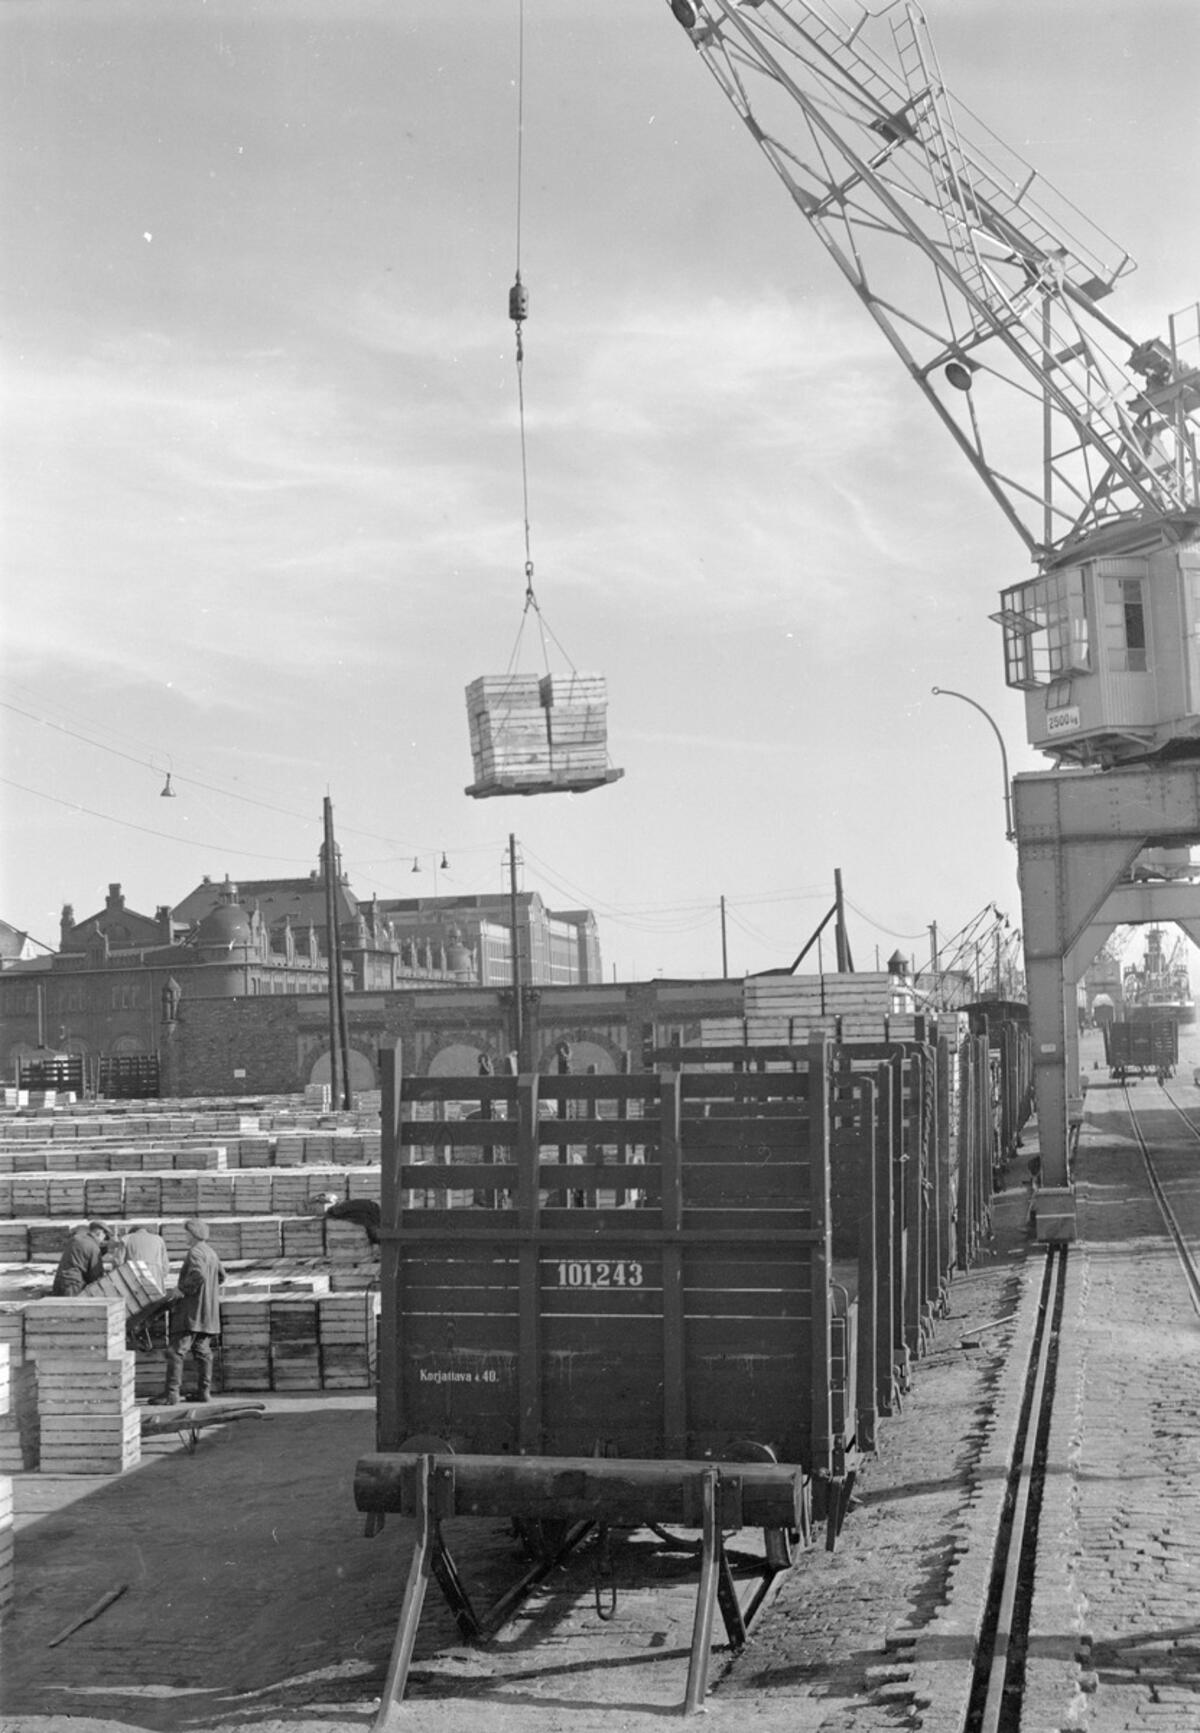 A crane lifting goods from a ship to an open freight wagon